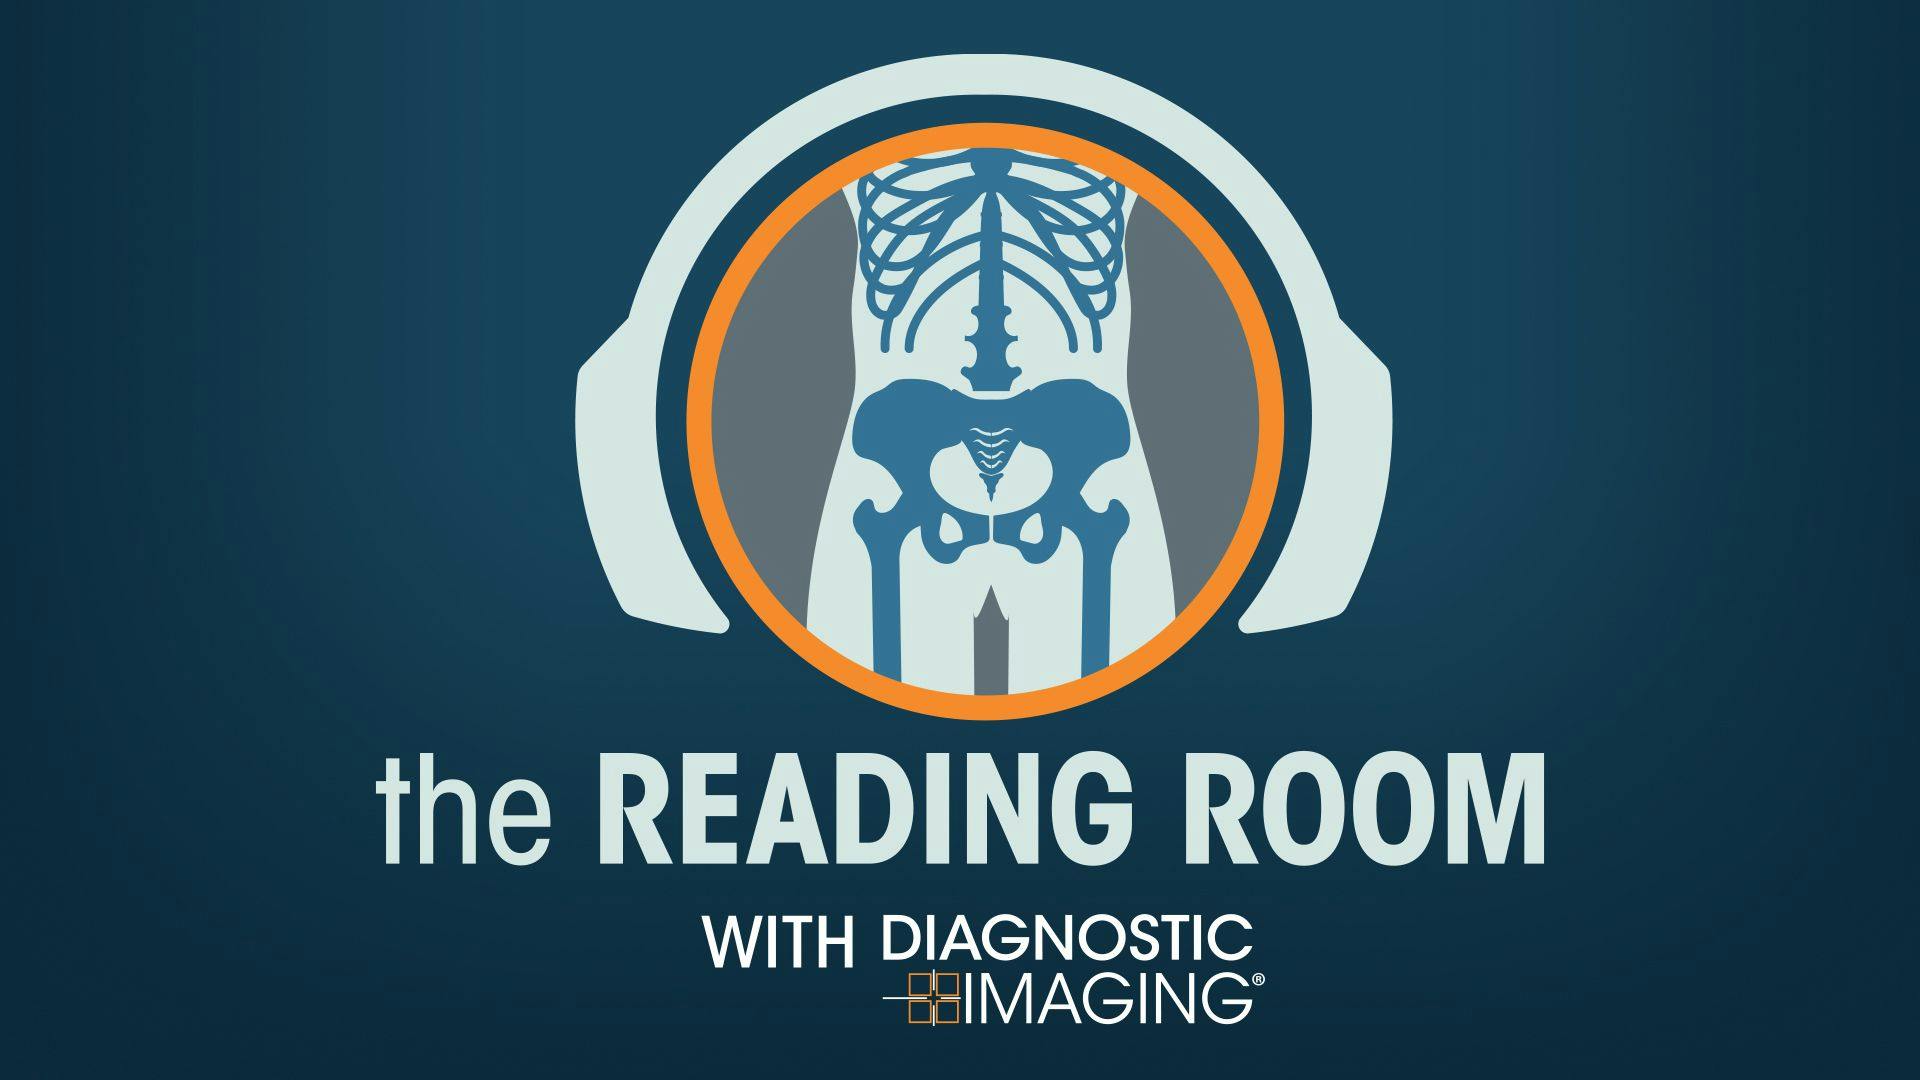 The Reading Room: Racial and Ethnic Minorities, Cancer Screenings, and COVID-19